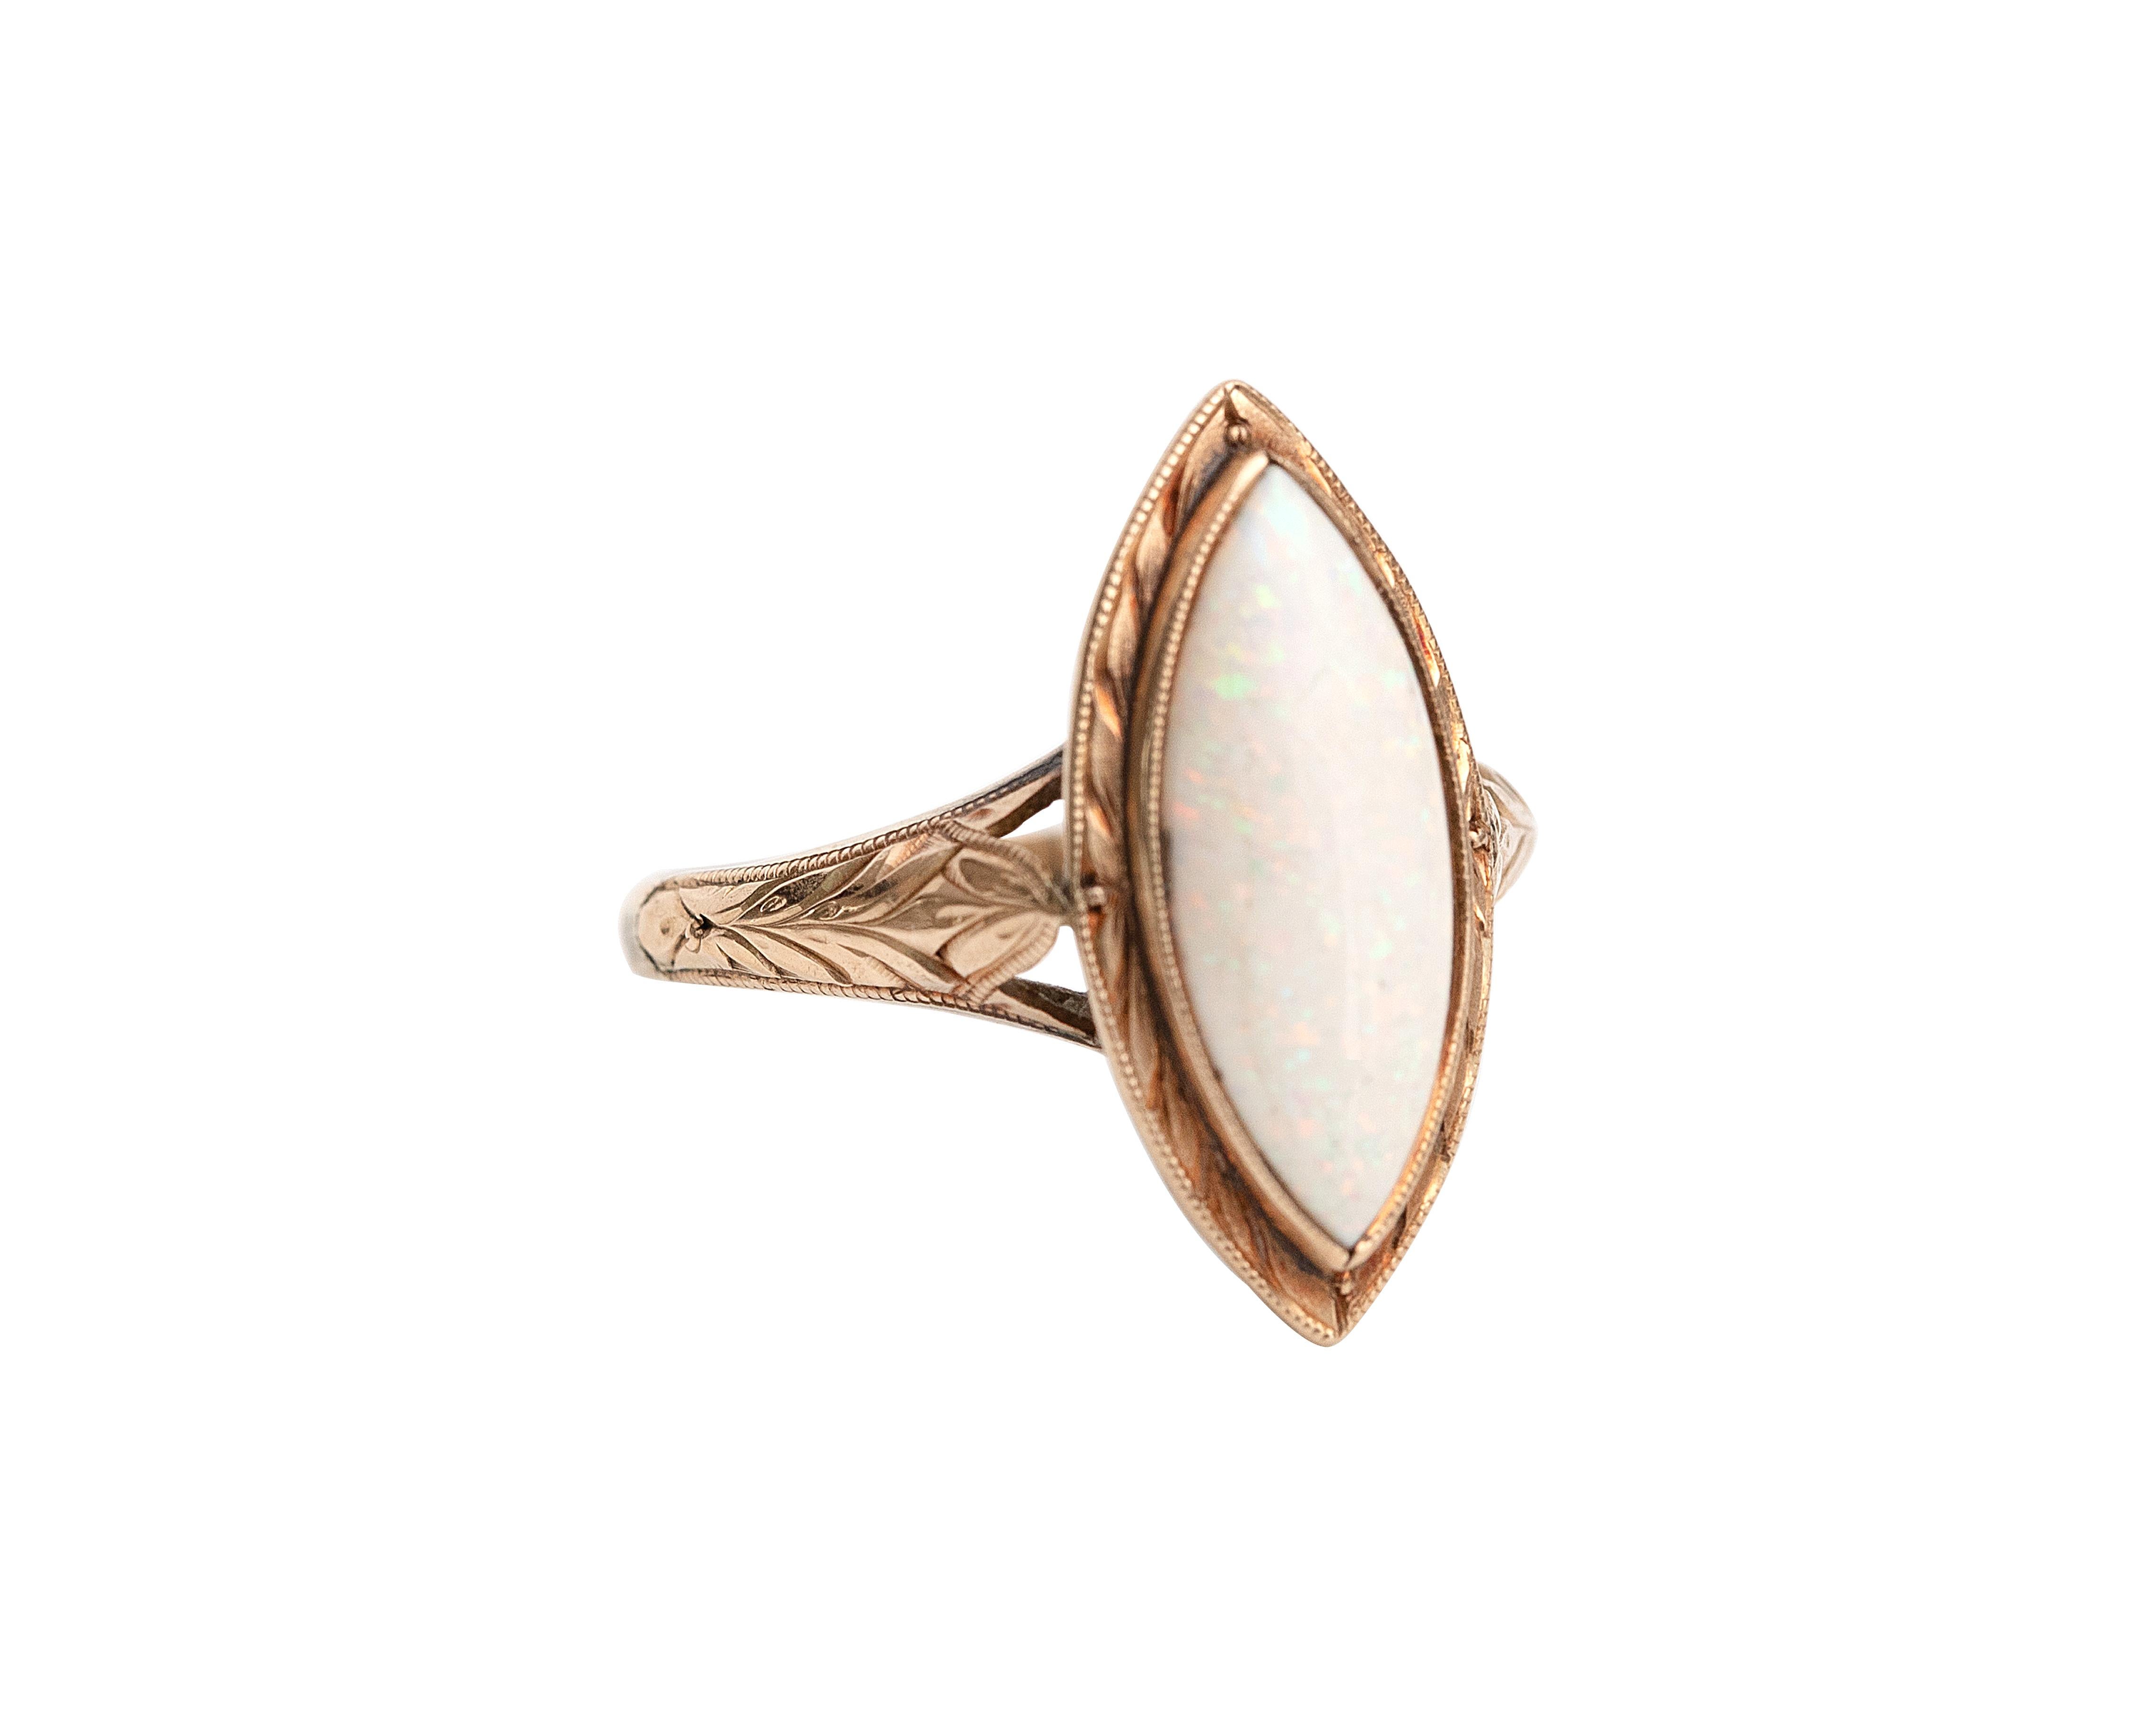 Here we have an excellent example of a Victorian-era 18K yellow gold ring with a large opal solitaire. The marquise cut center opal is flanked by intricate engraved shoulders as well as a matching etched design around the rim. The center opal is